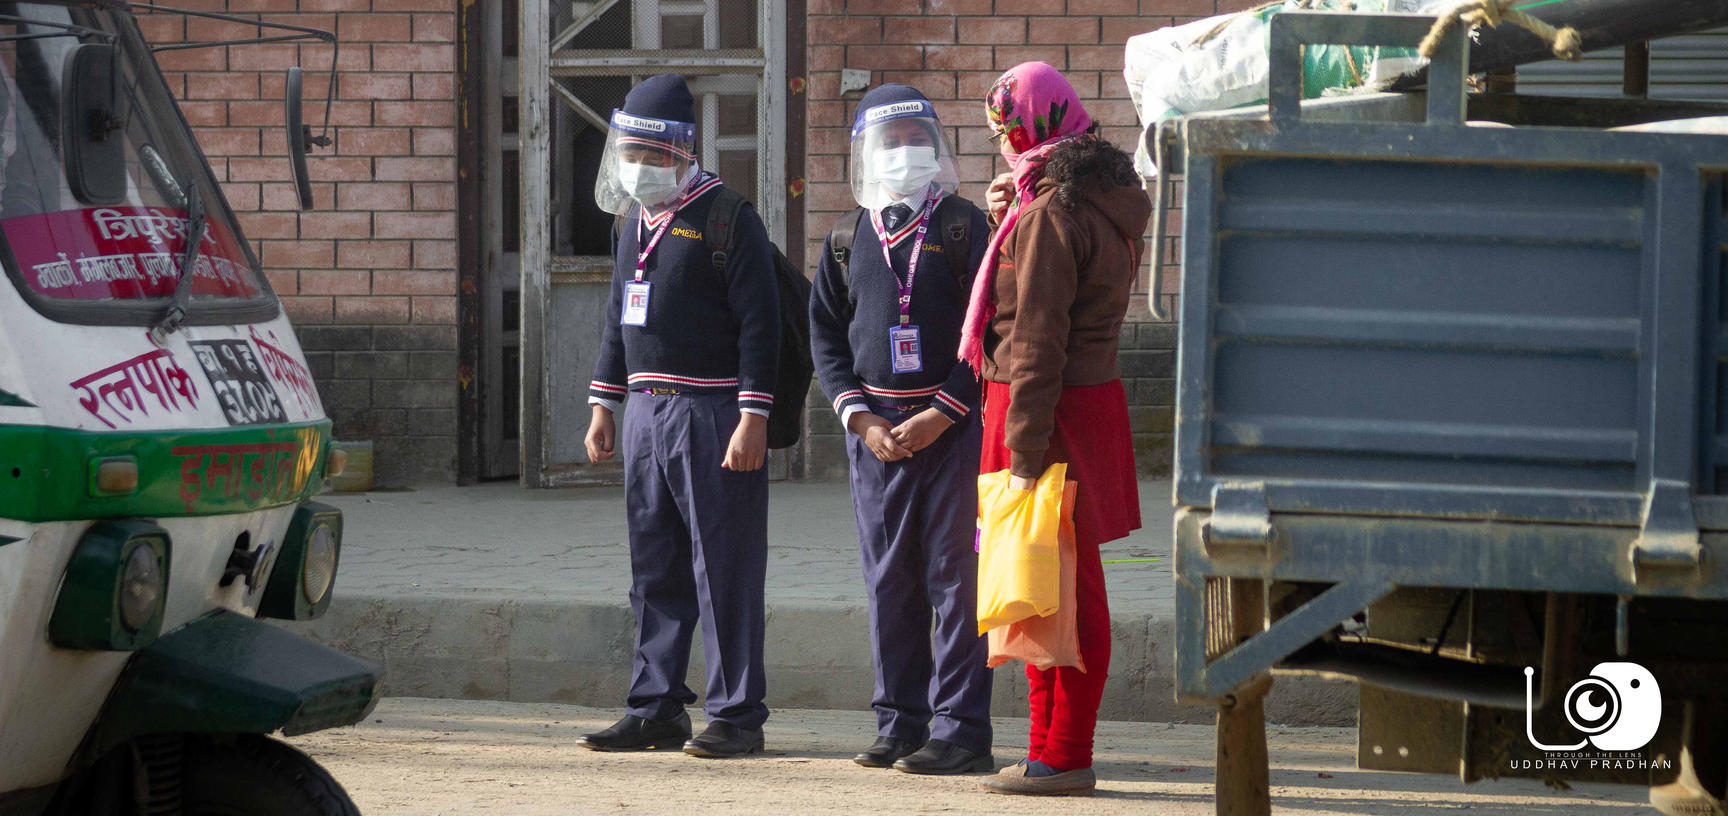 Students wearing masks and waiting for school bus (Nepal)